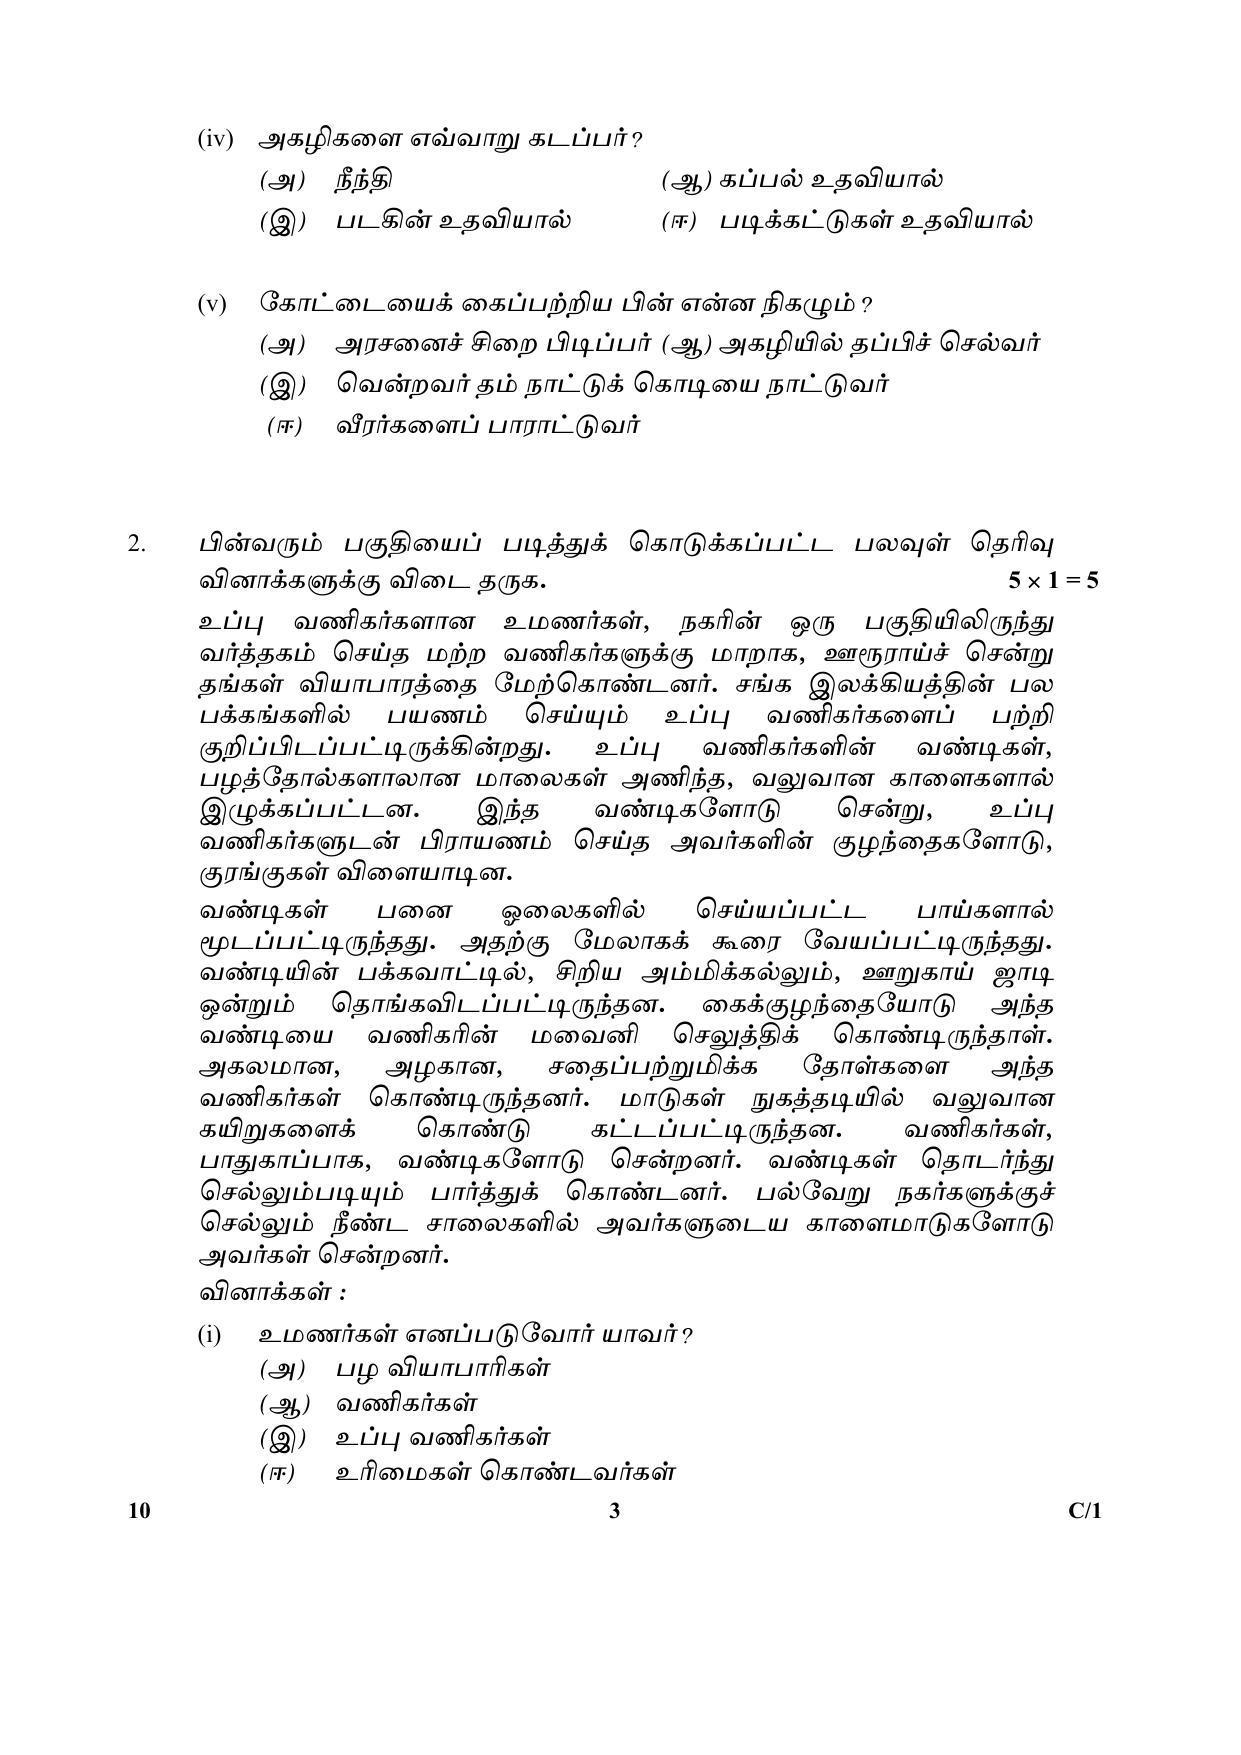 CBSE Class 10 10 (Tamil) 2018 Compartment Question Paper - Page 3